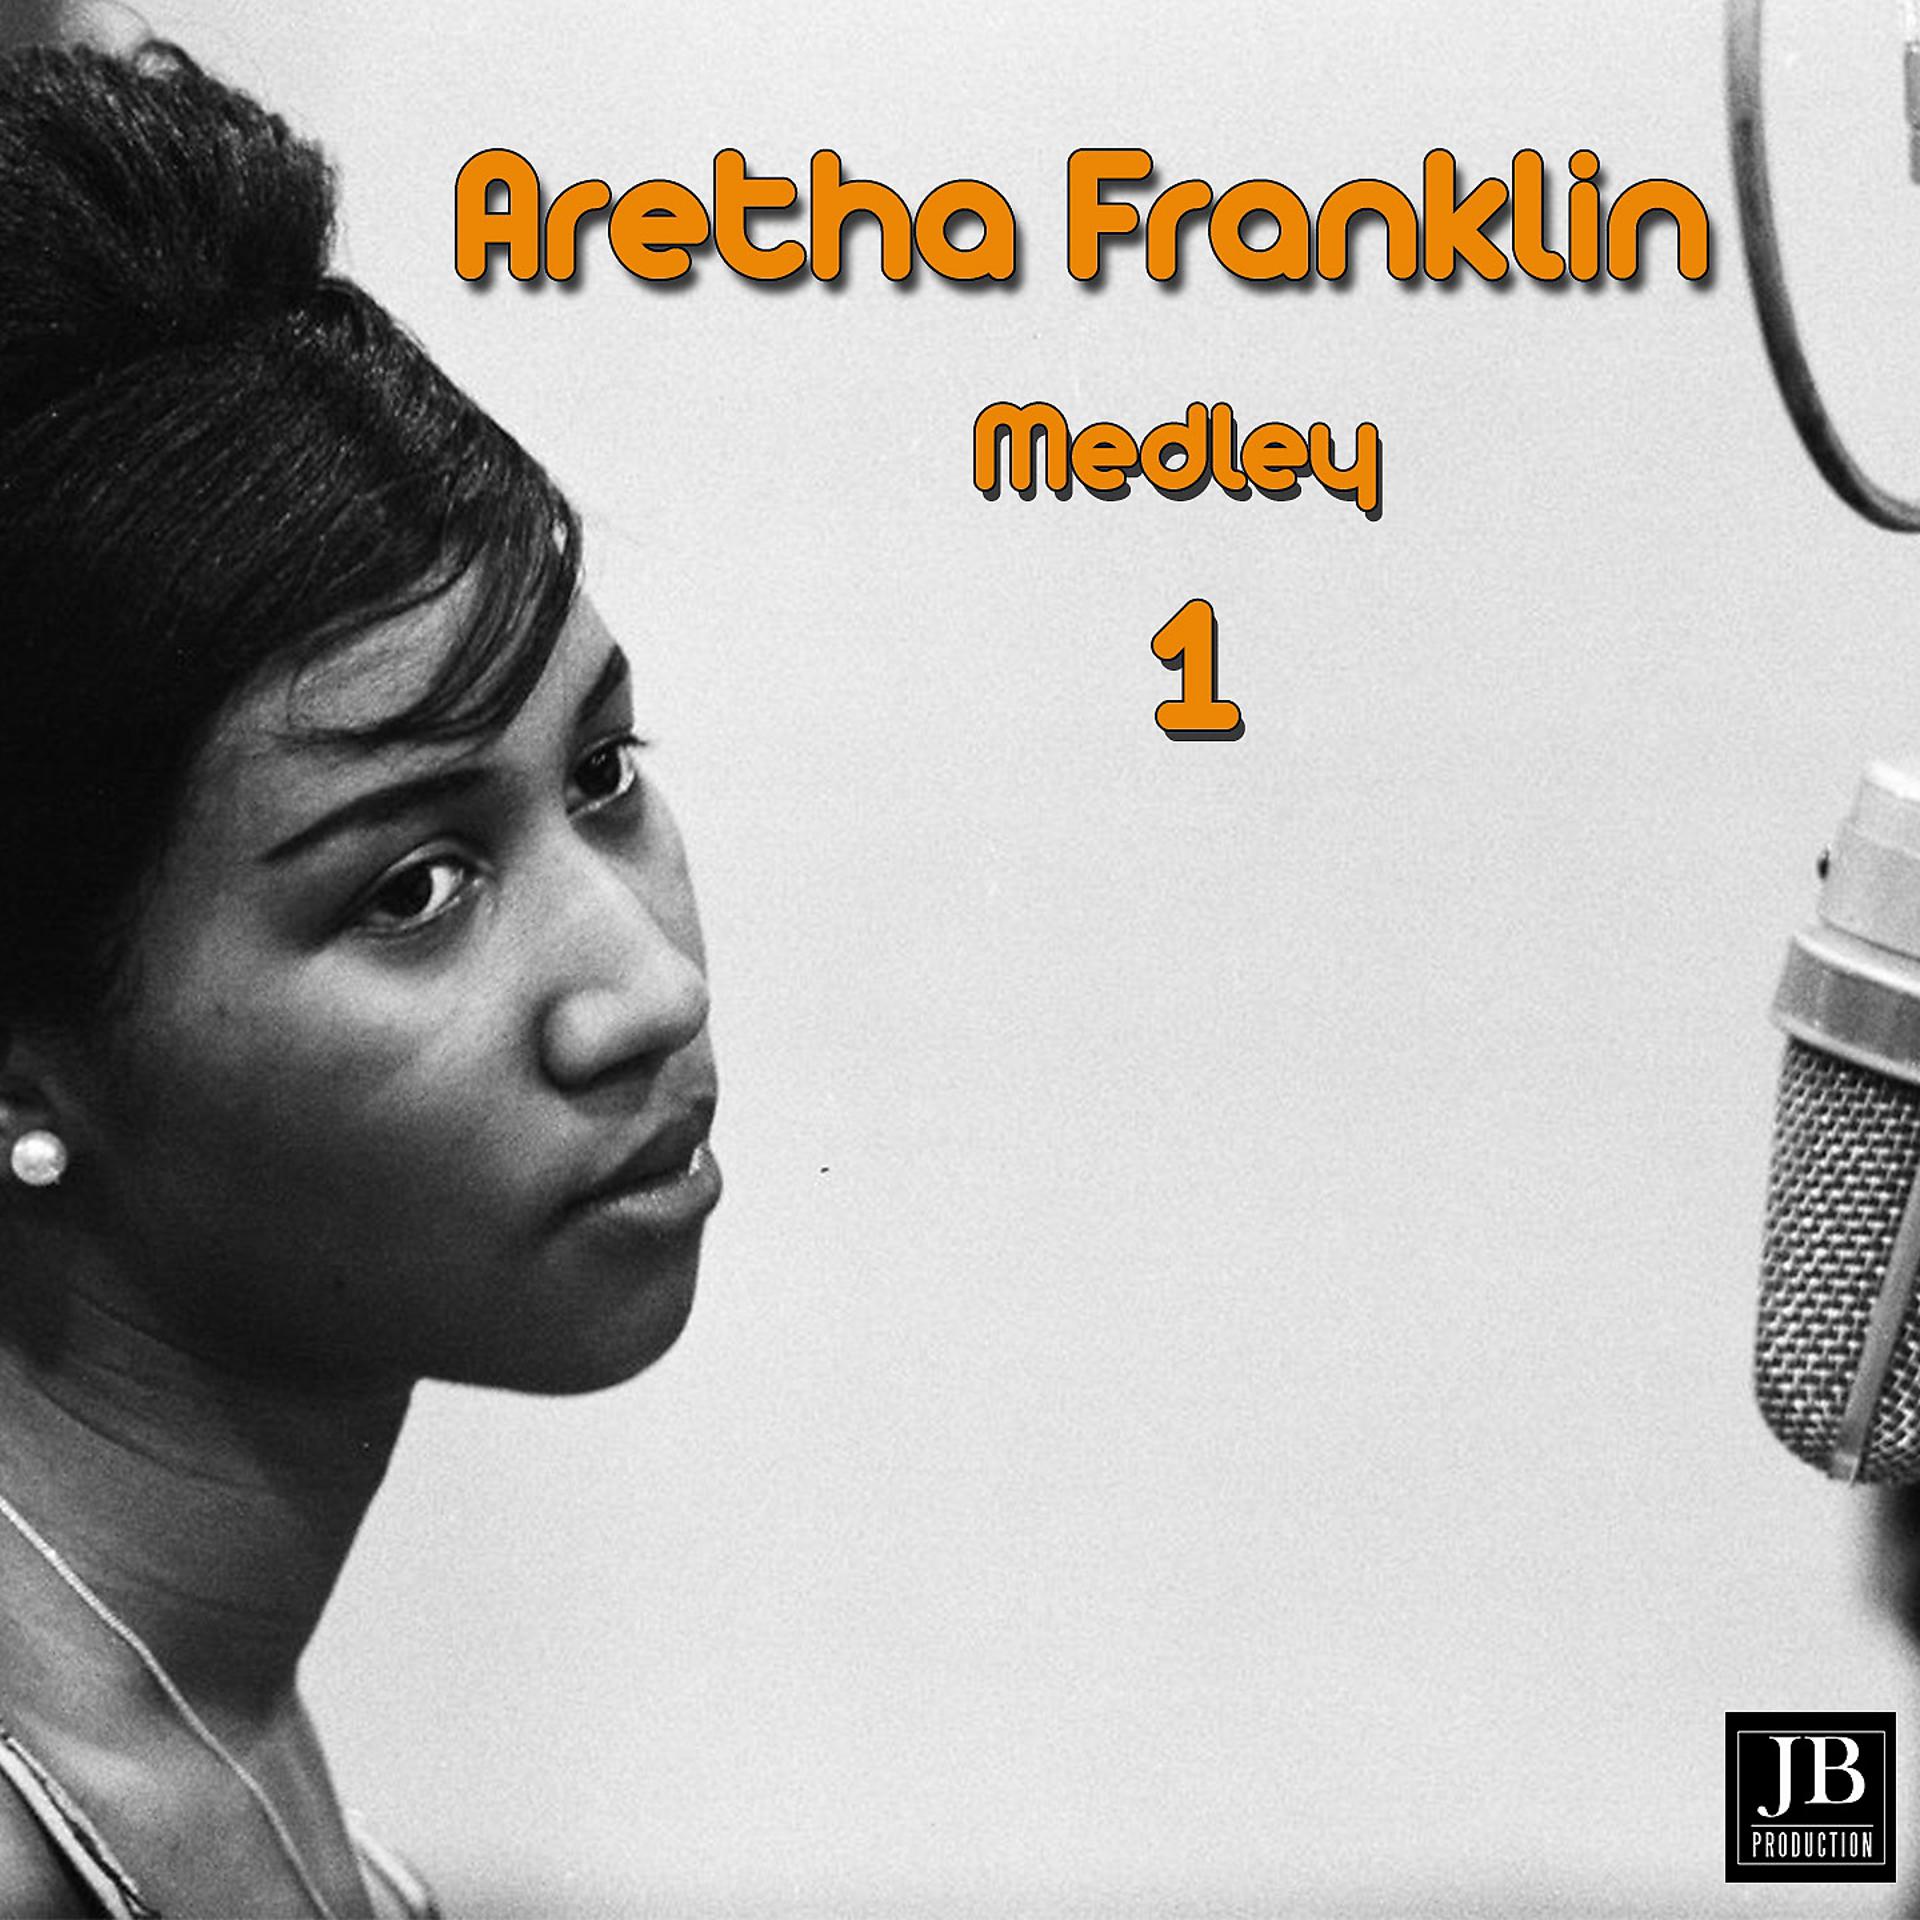 Постер альбома Aretha Franklin Medley 1: Won't Be Long / Sweet Lover / It's so Heartbreakin' / Right Now / Love Is the Only Thing / All Night Long / Maybe I'm a Fool / Just for You / Exactly Like You / (Blue) by Myself / Today I Sing the Blues / Just for a Thrill / Rock